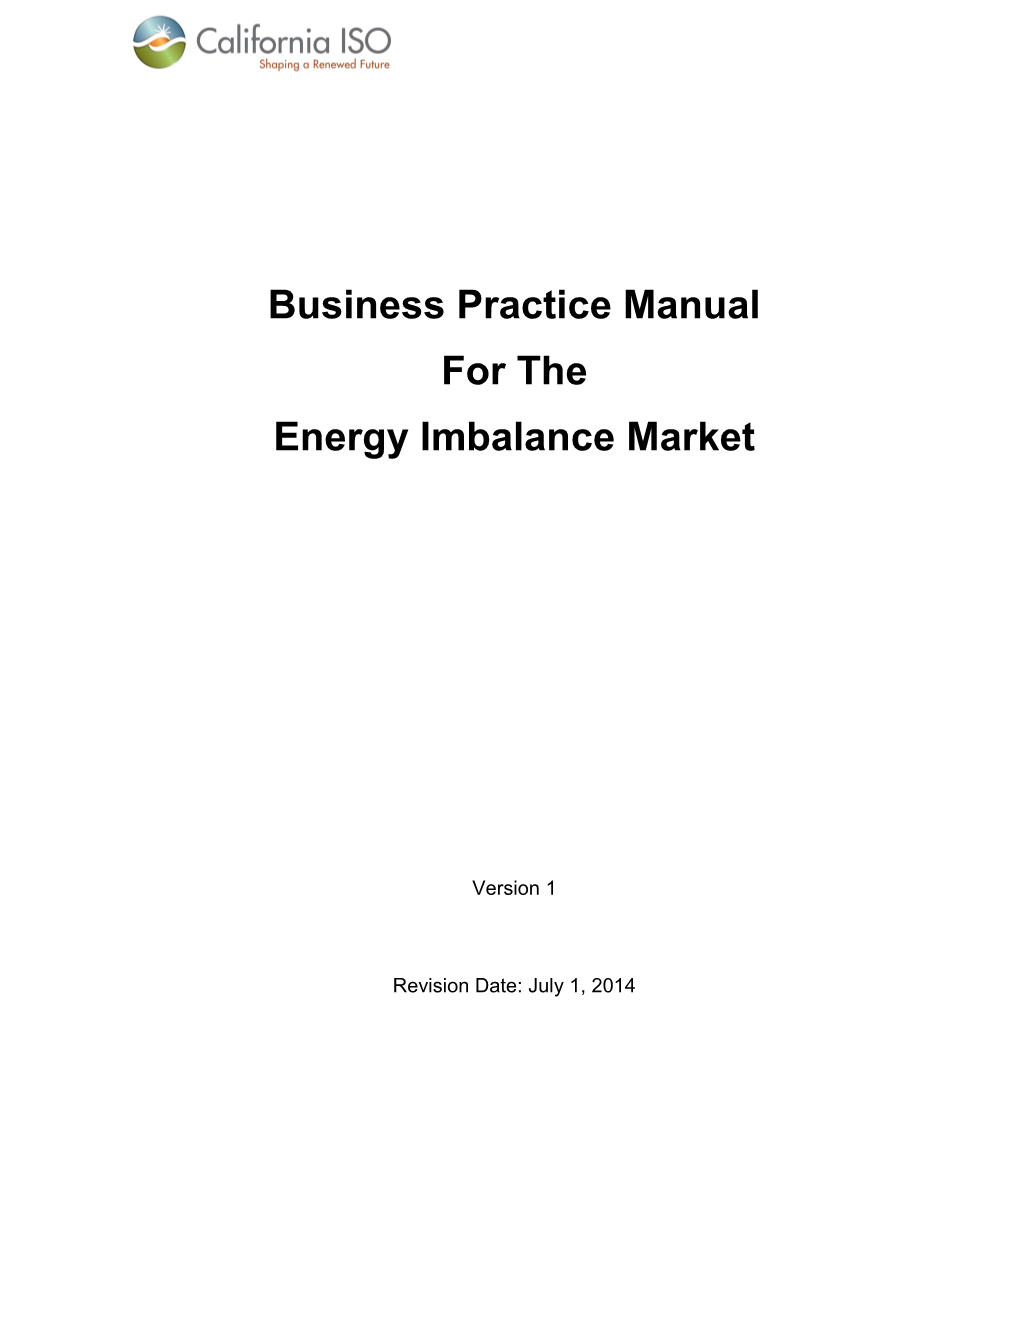 CAISO Business Practice Manual BPM for the Energy Imbalance Market